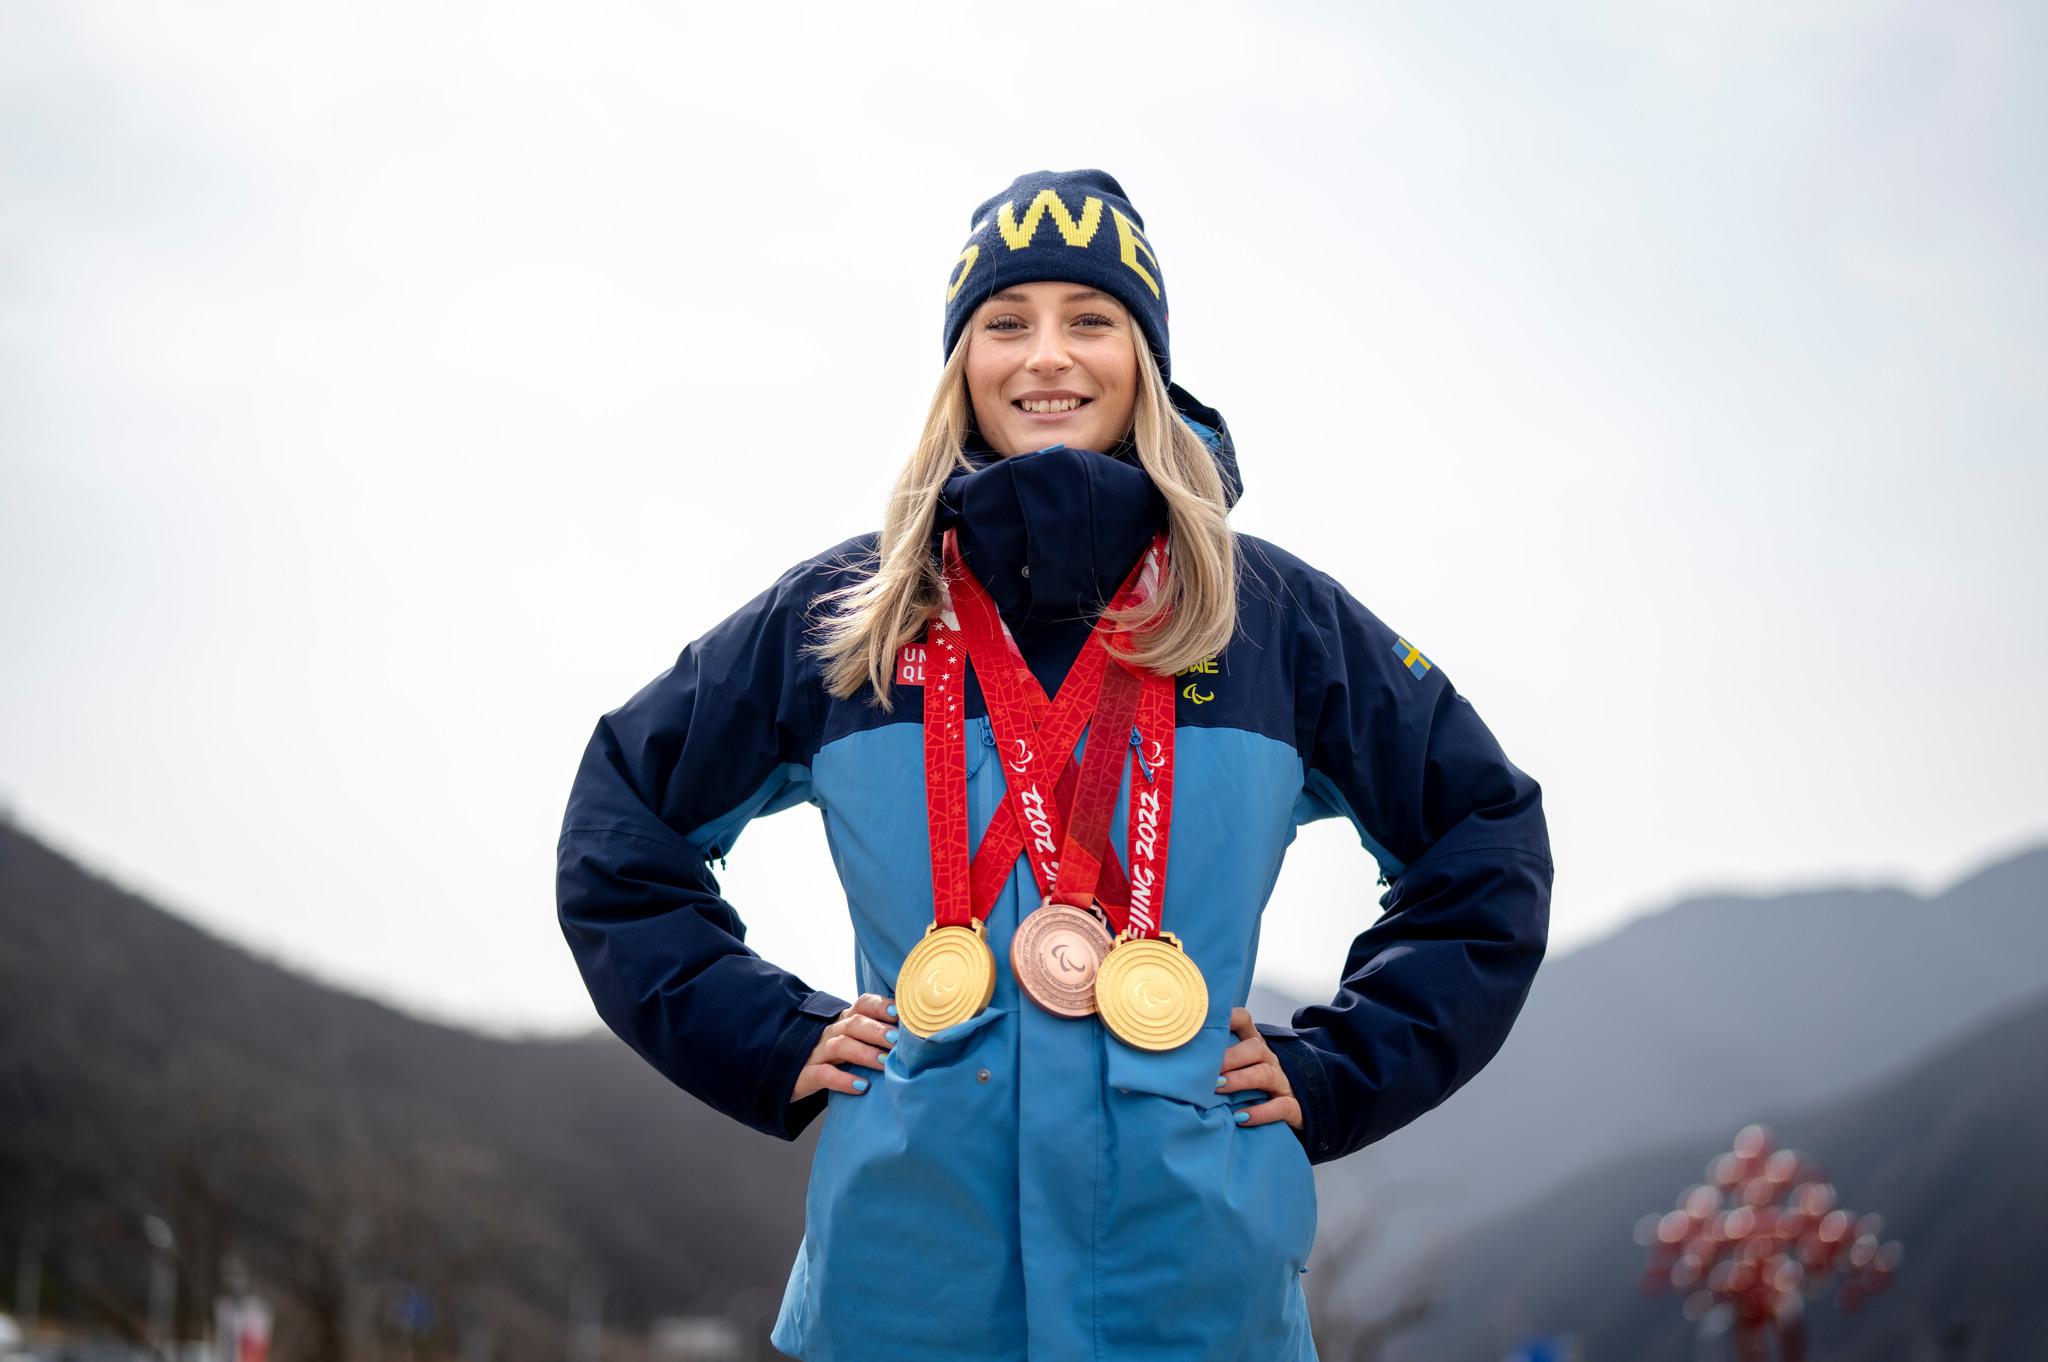 Ebba Årsjö – one of the Swedish sports stars – with her two golds and one bronze at the 2022 Paralympics.